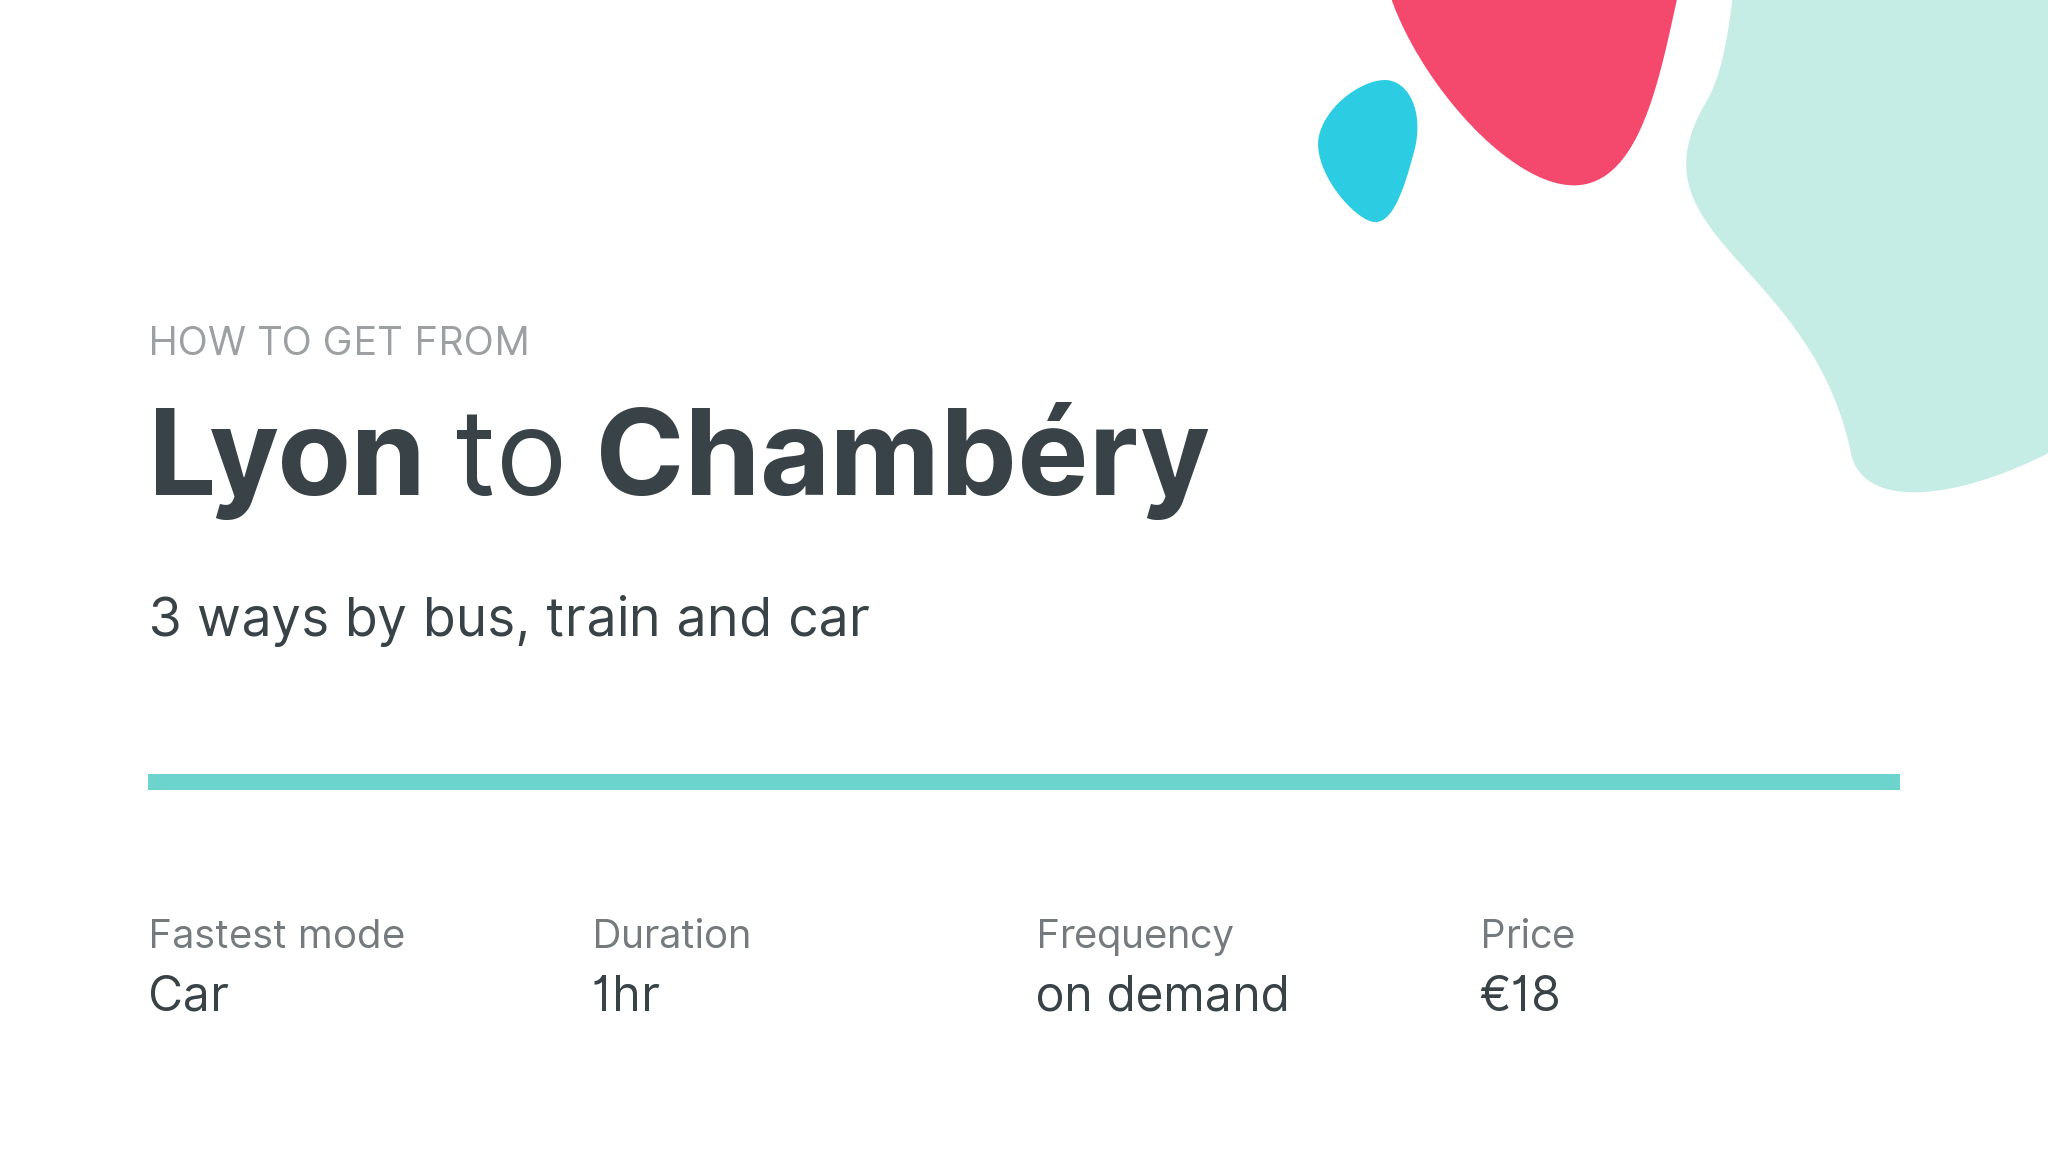 How do I get from Lyon to Chambéry